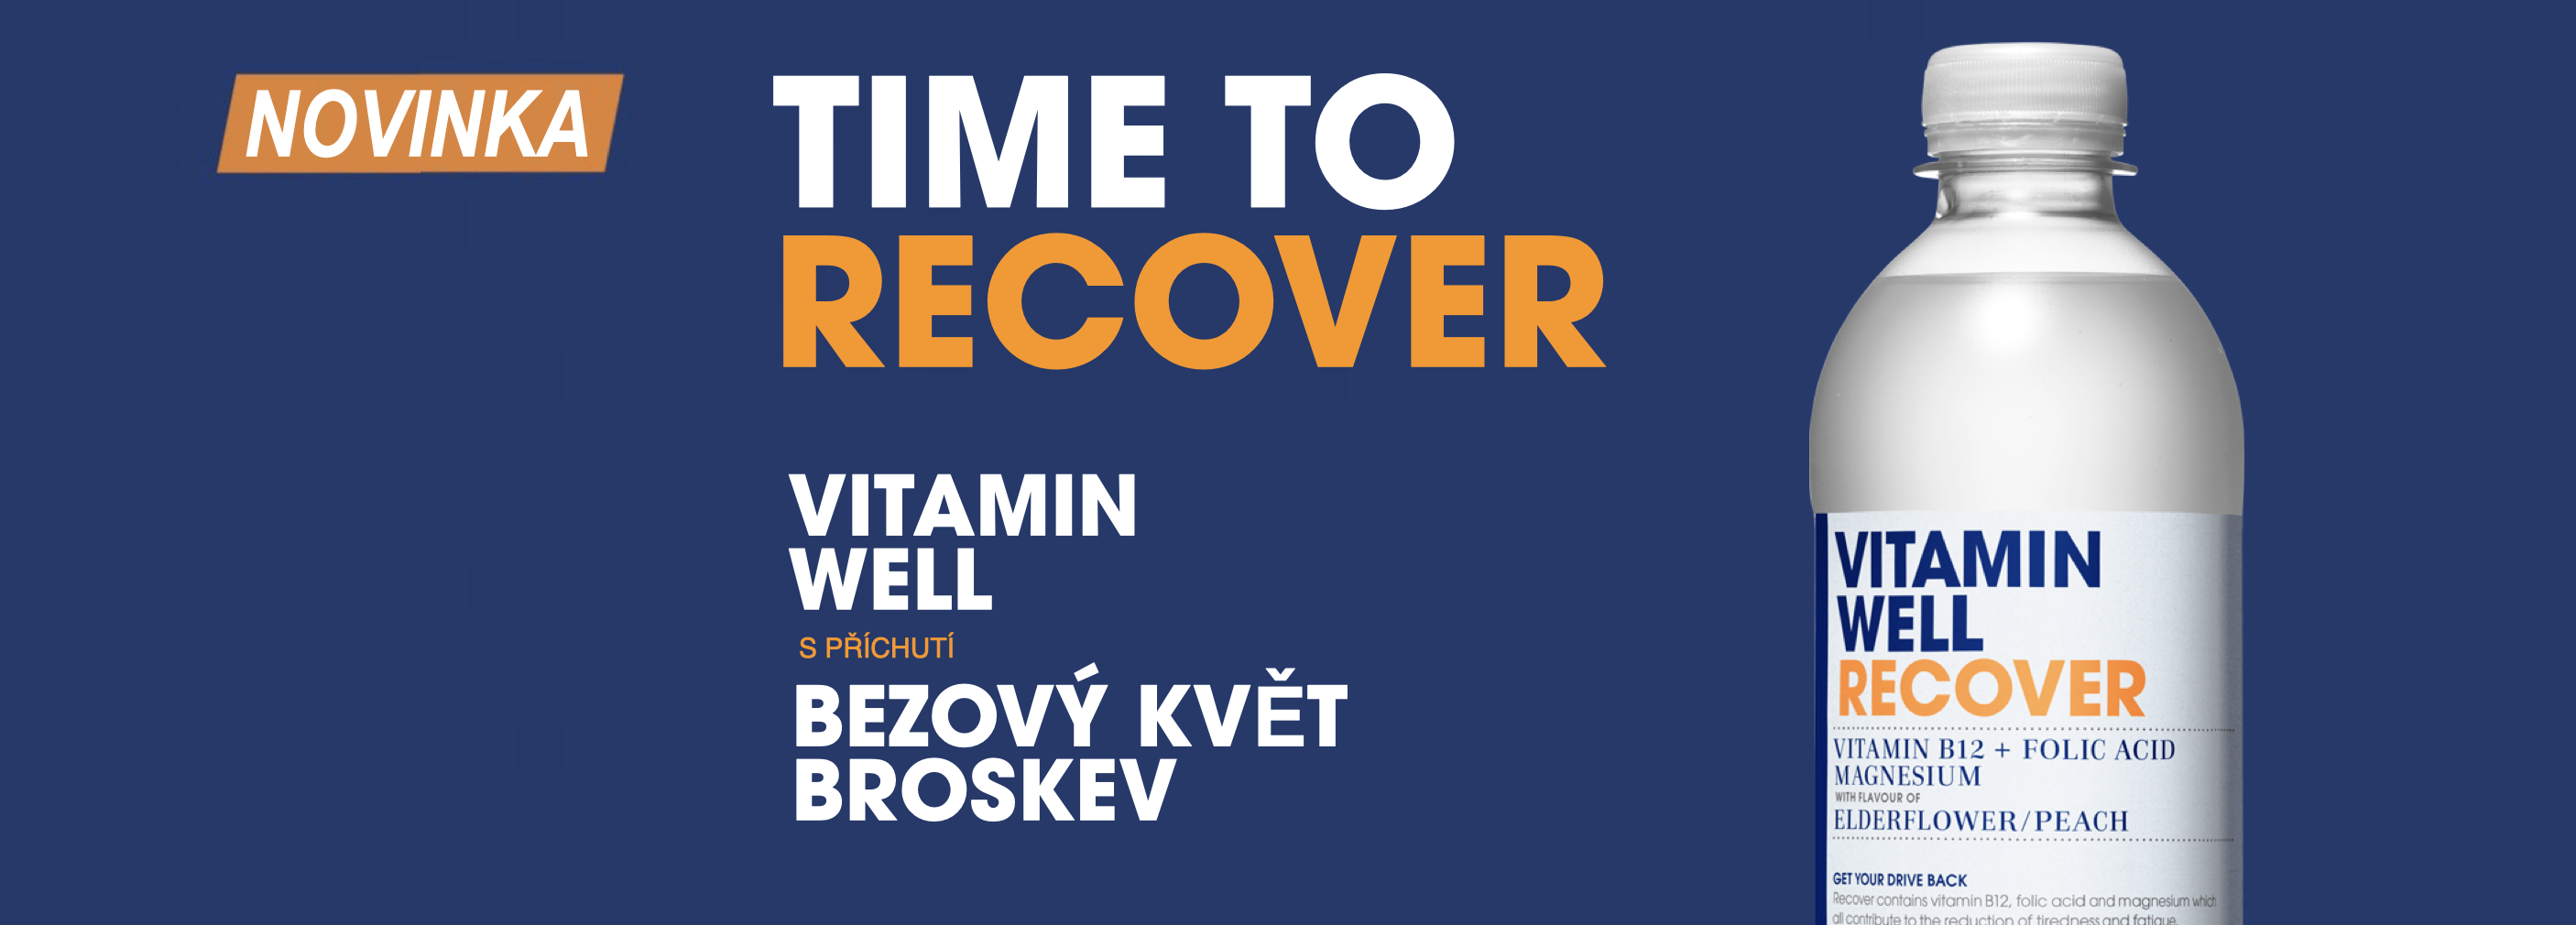 vitamin well recover